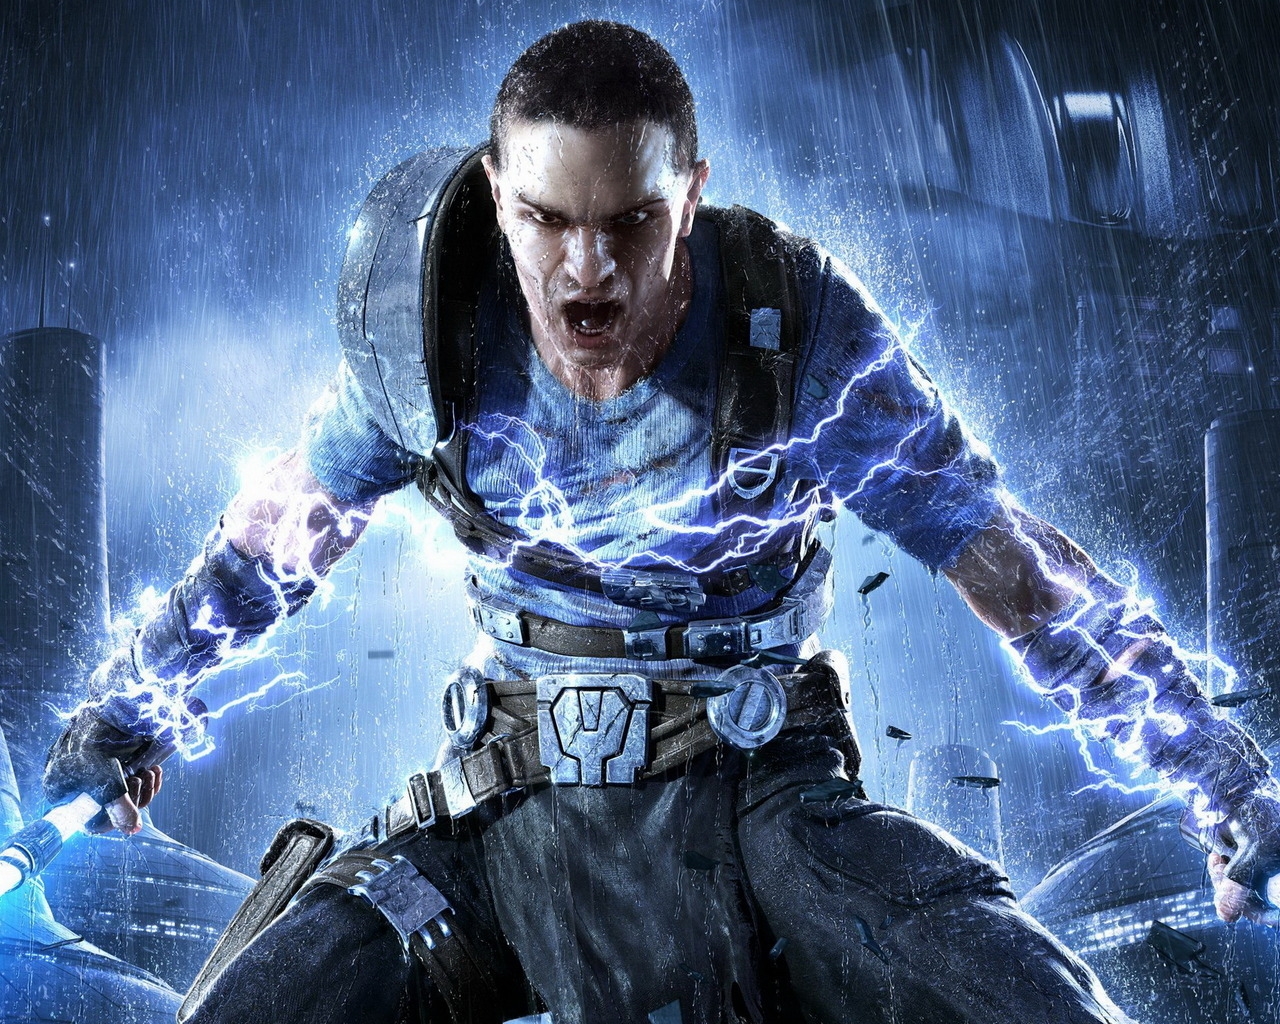 Star Wars Force Unleashed for 1280 x 1024 resolution